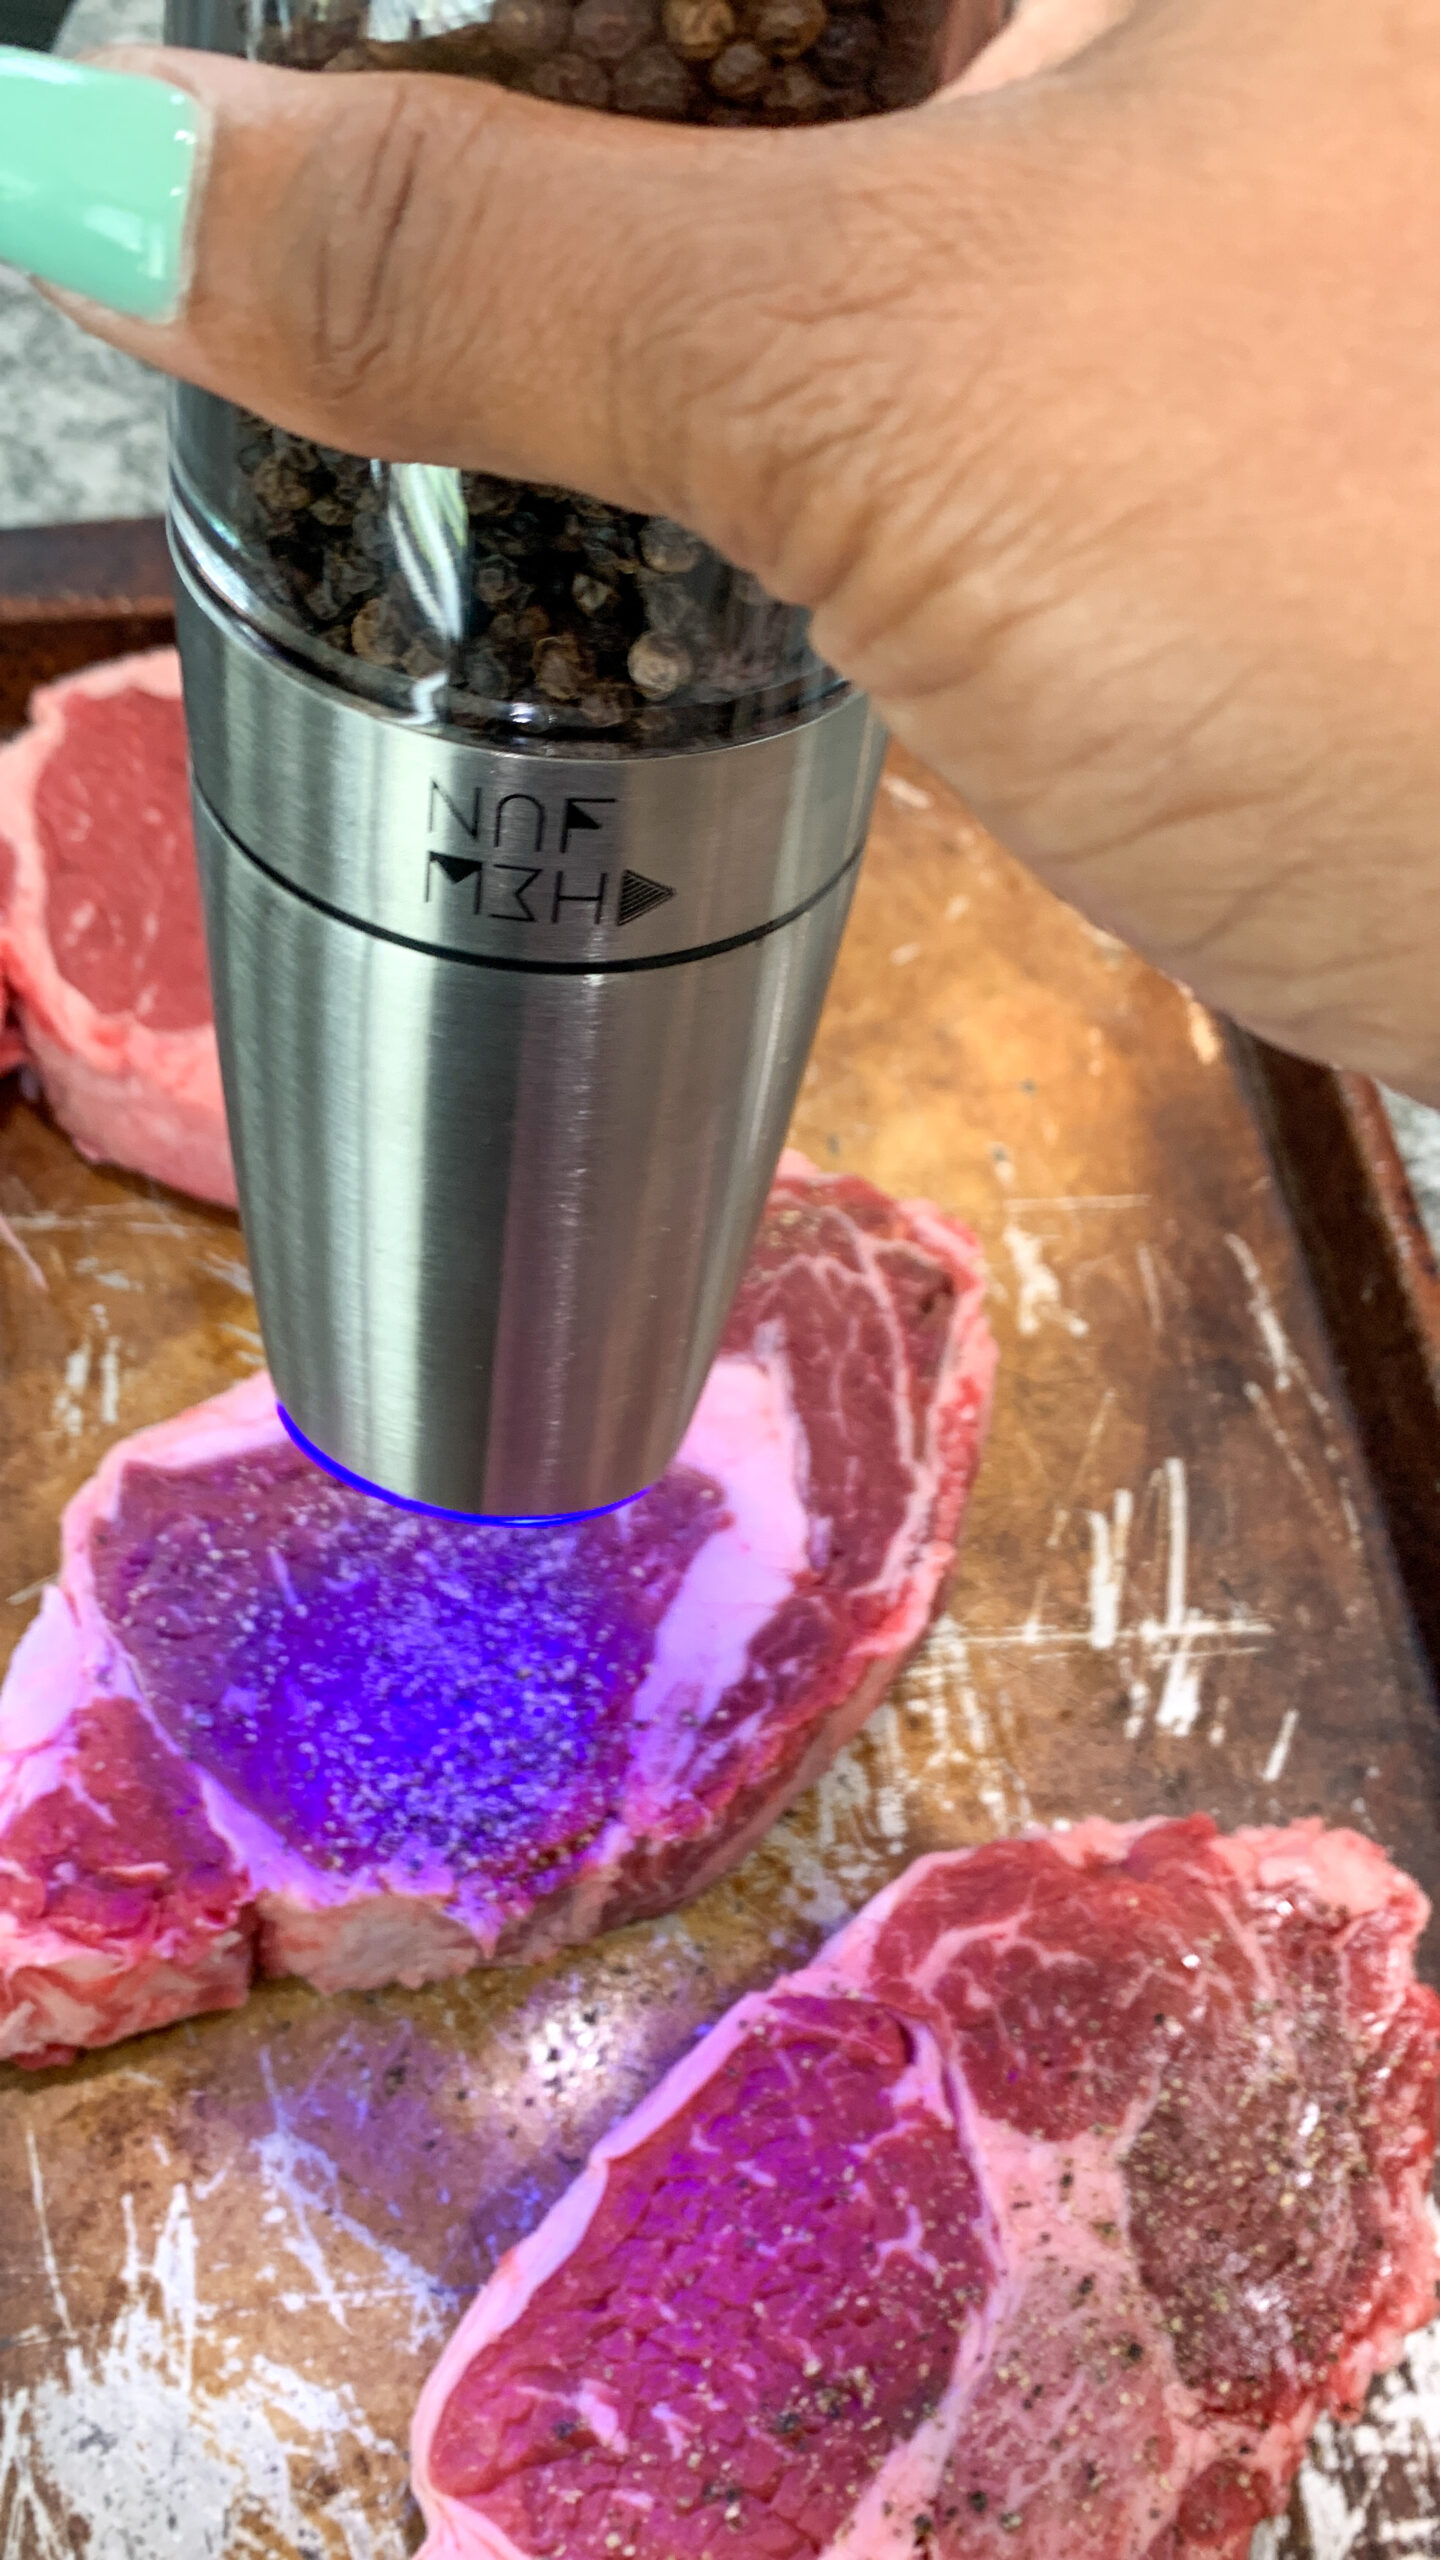 Has anyone used a Su-VGun by GrillBlazer? If yes whats your opinion :  r/sousvide